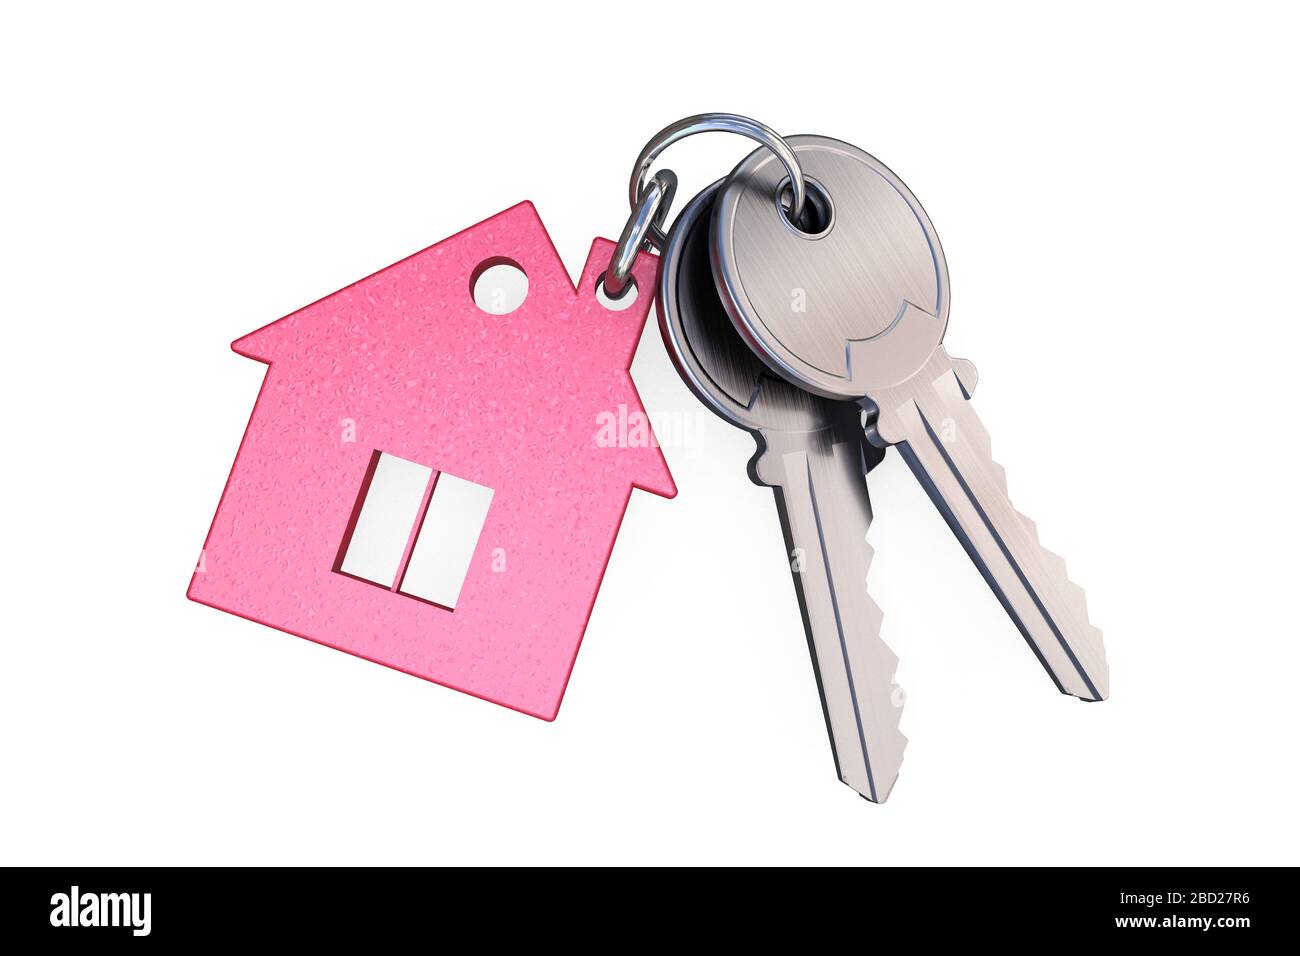 3D illustration: Pink transparent glass keychain in the form of a house with a pipe and a window connected by a ring with two metal keys. Stock Photo